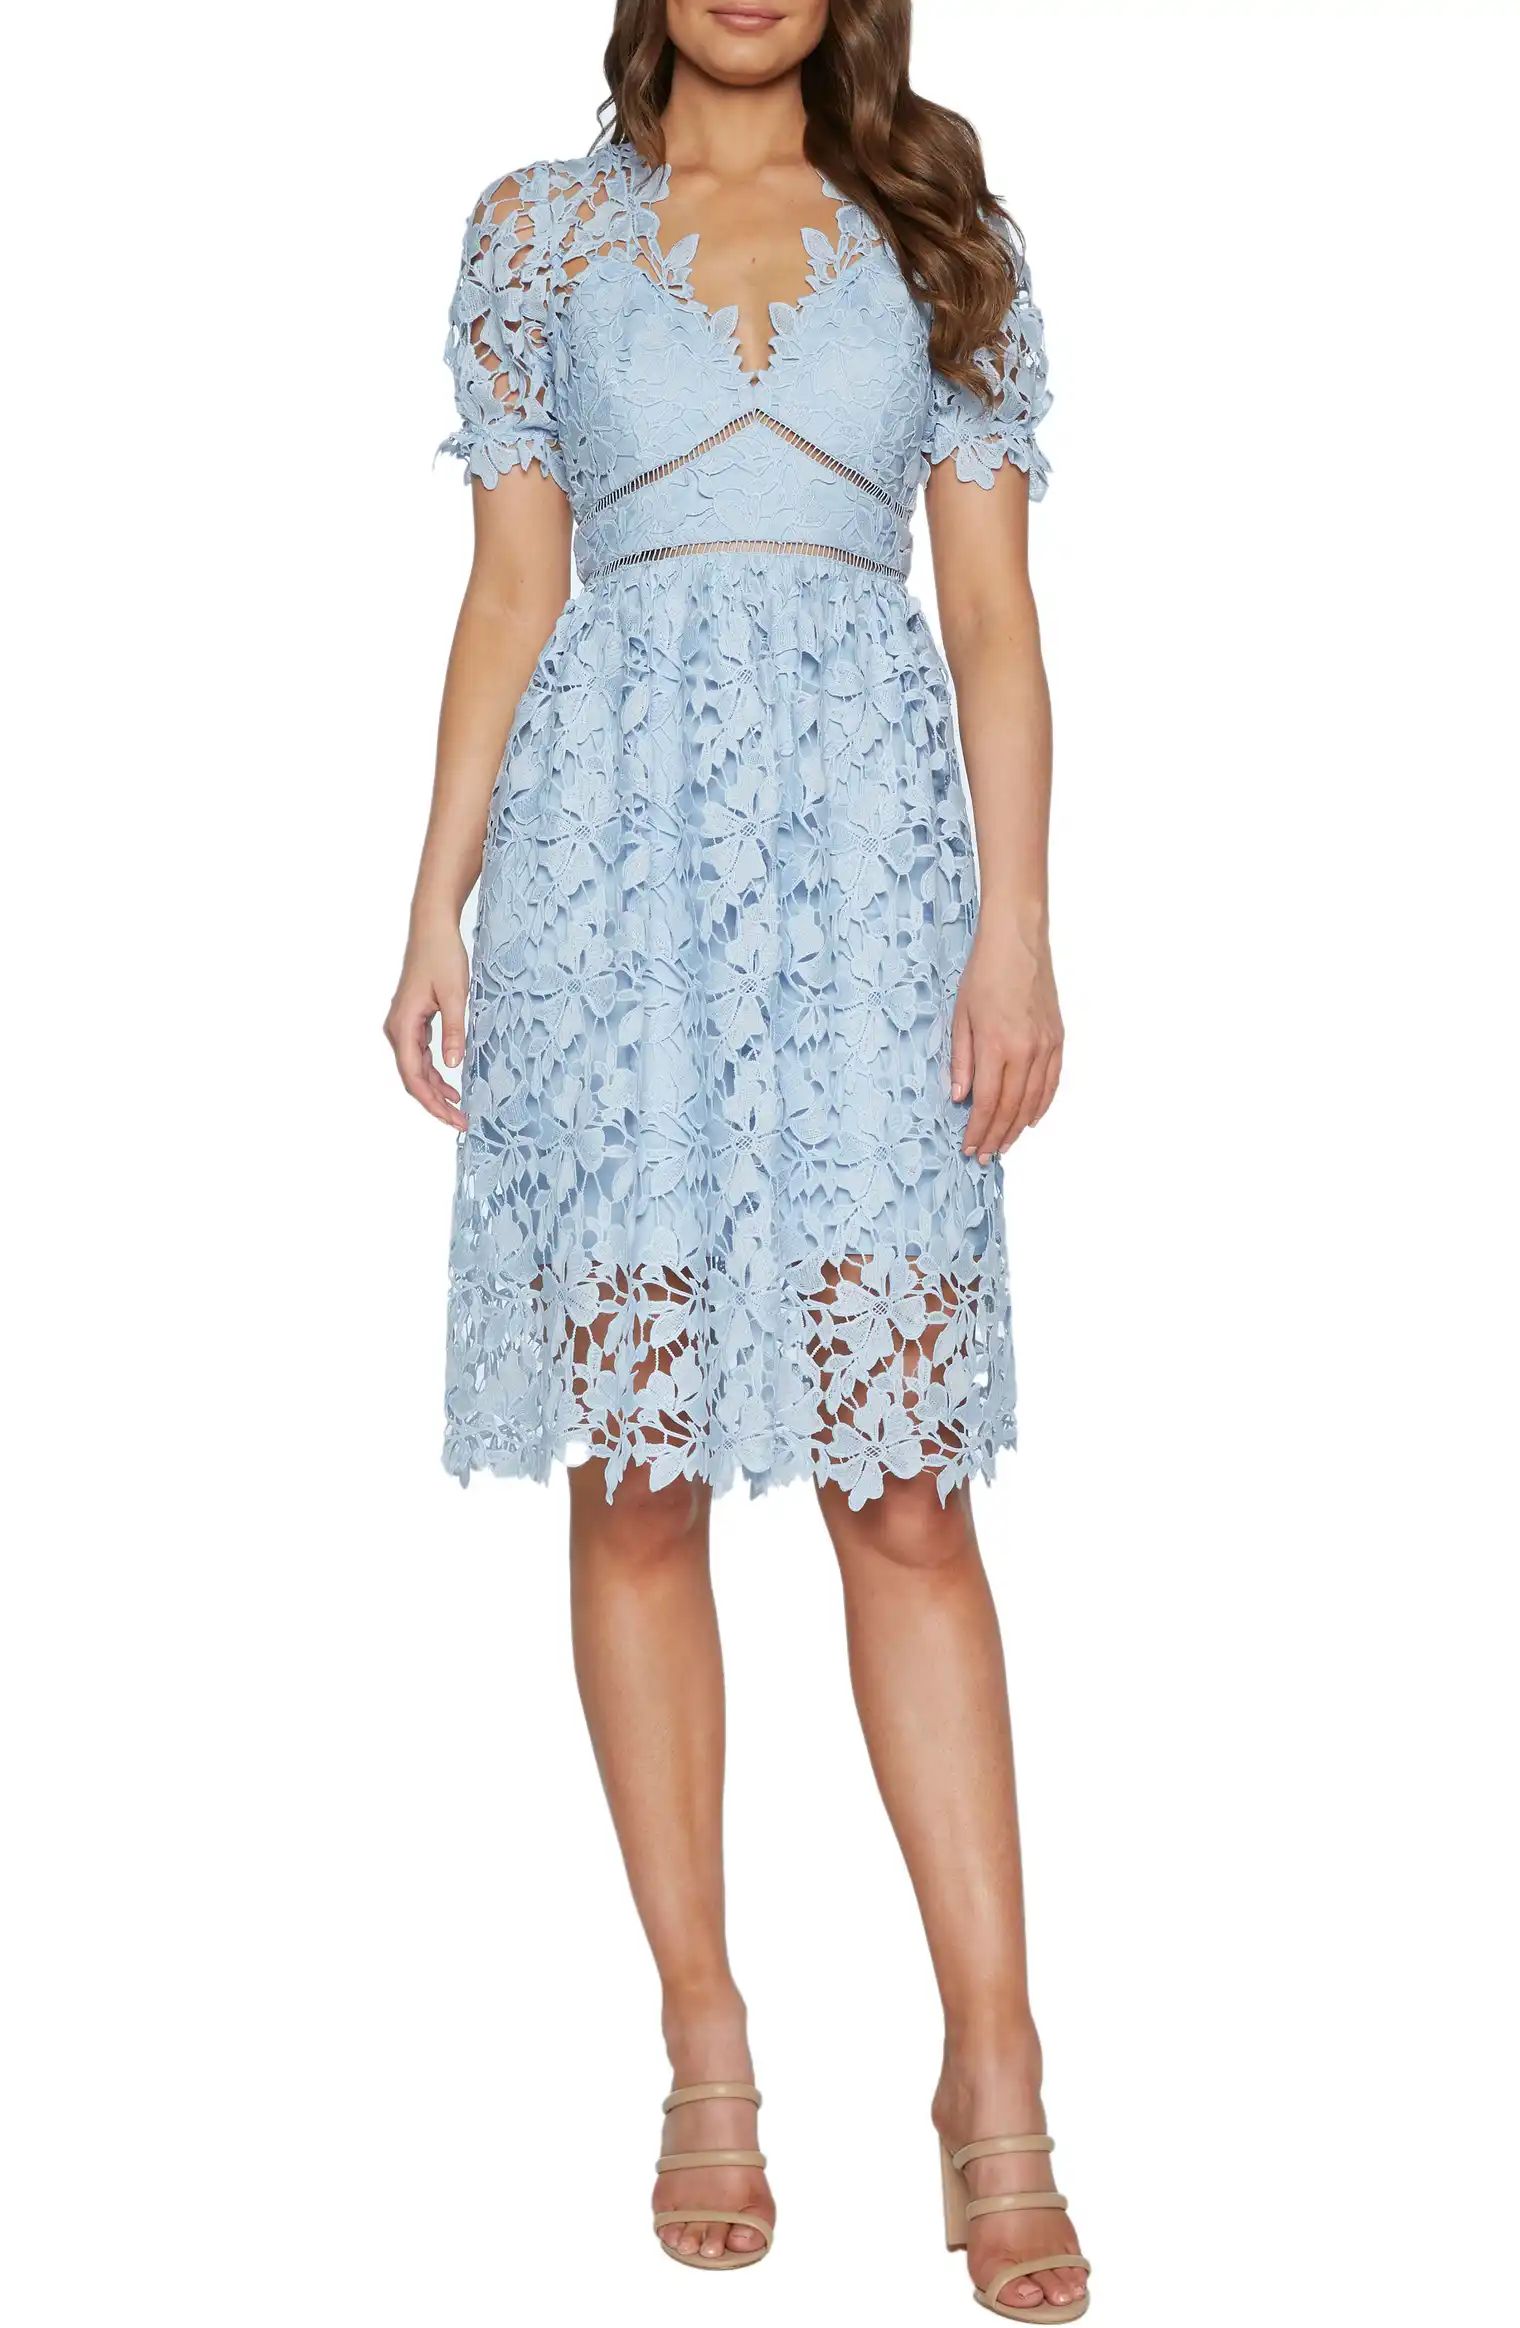 Ricko Lace Dress | Nordstrom